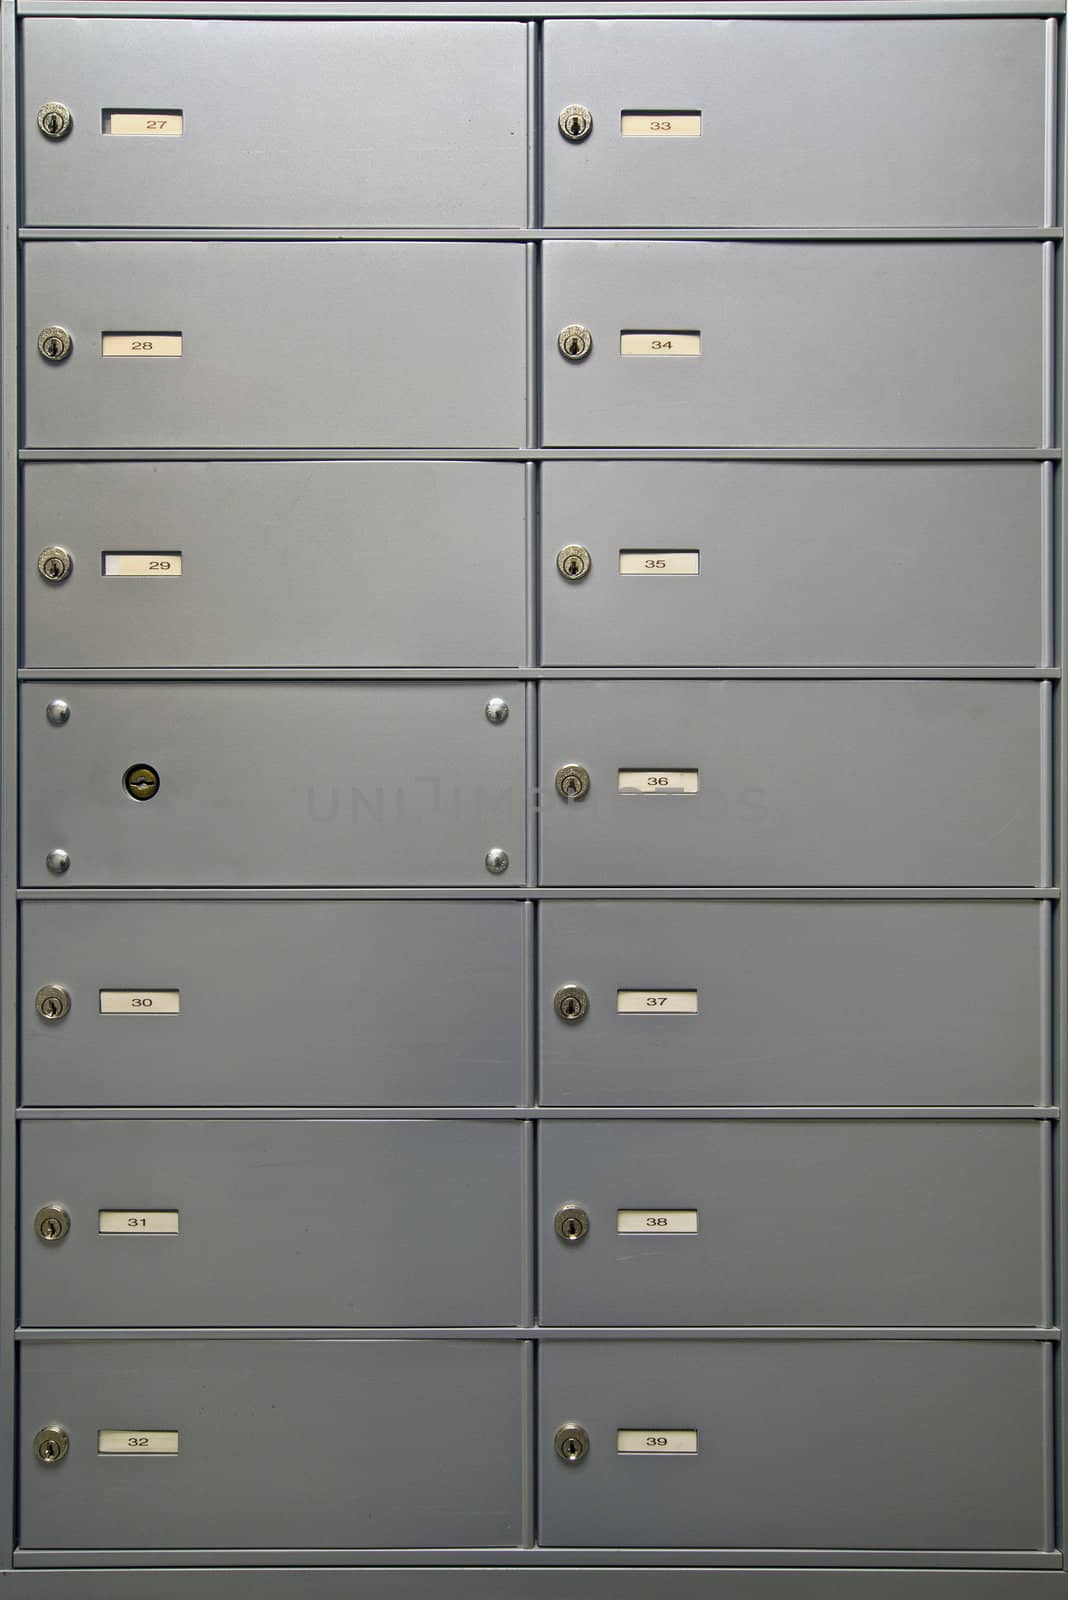 Mail Boxes by Davidgn